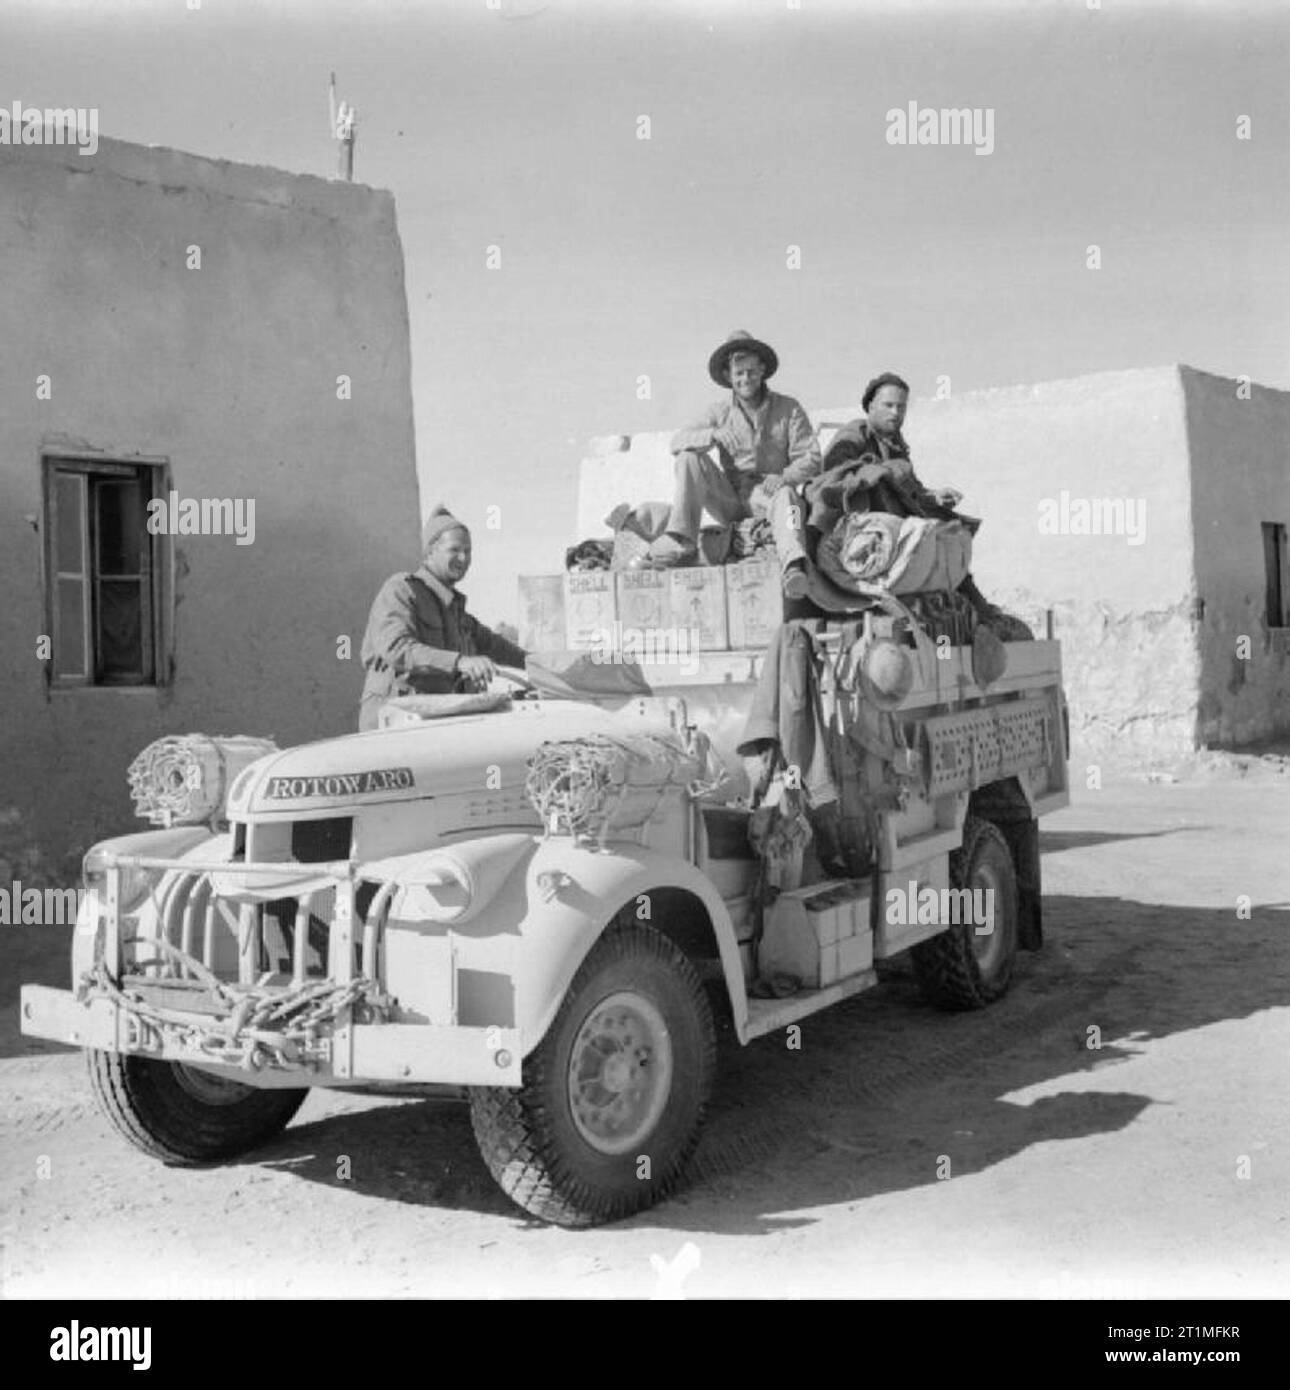 The Long Range Desert Group (lrdg) in North Africa during the Second World War A well-loaded Chevrolet truck about to set off on patrol from Siwa. This vehicle was crewed by New Zealanders, many of whom joined the Long Range Desert Group in 1940 from a consignment of troops who found themselves at Alexandria without their arms and equipment, which had been lost at sea. Stock Photo